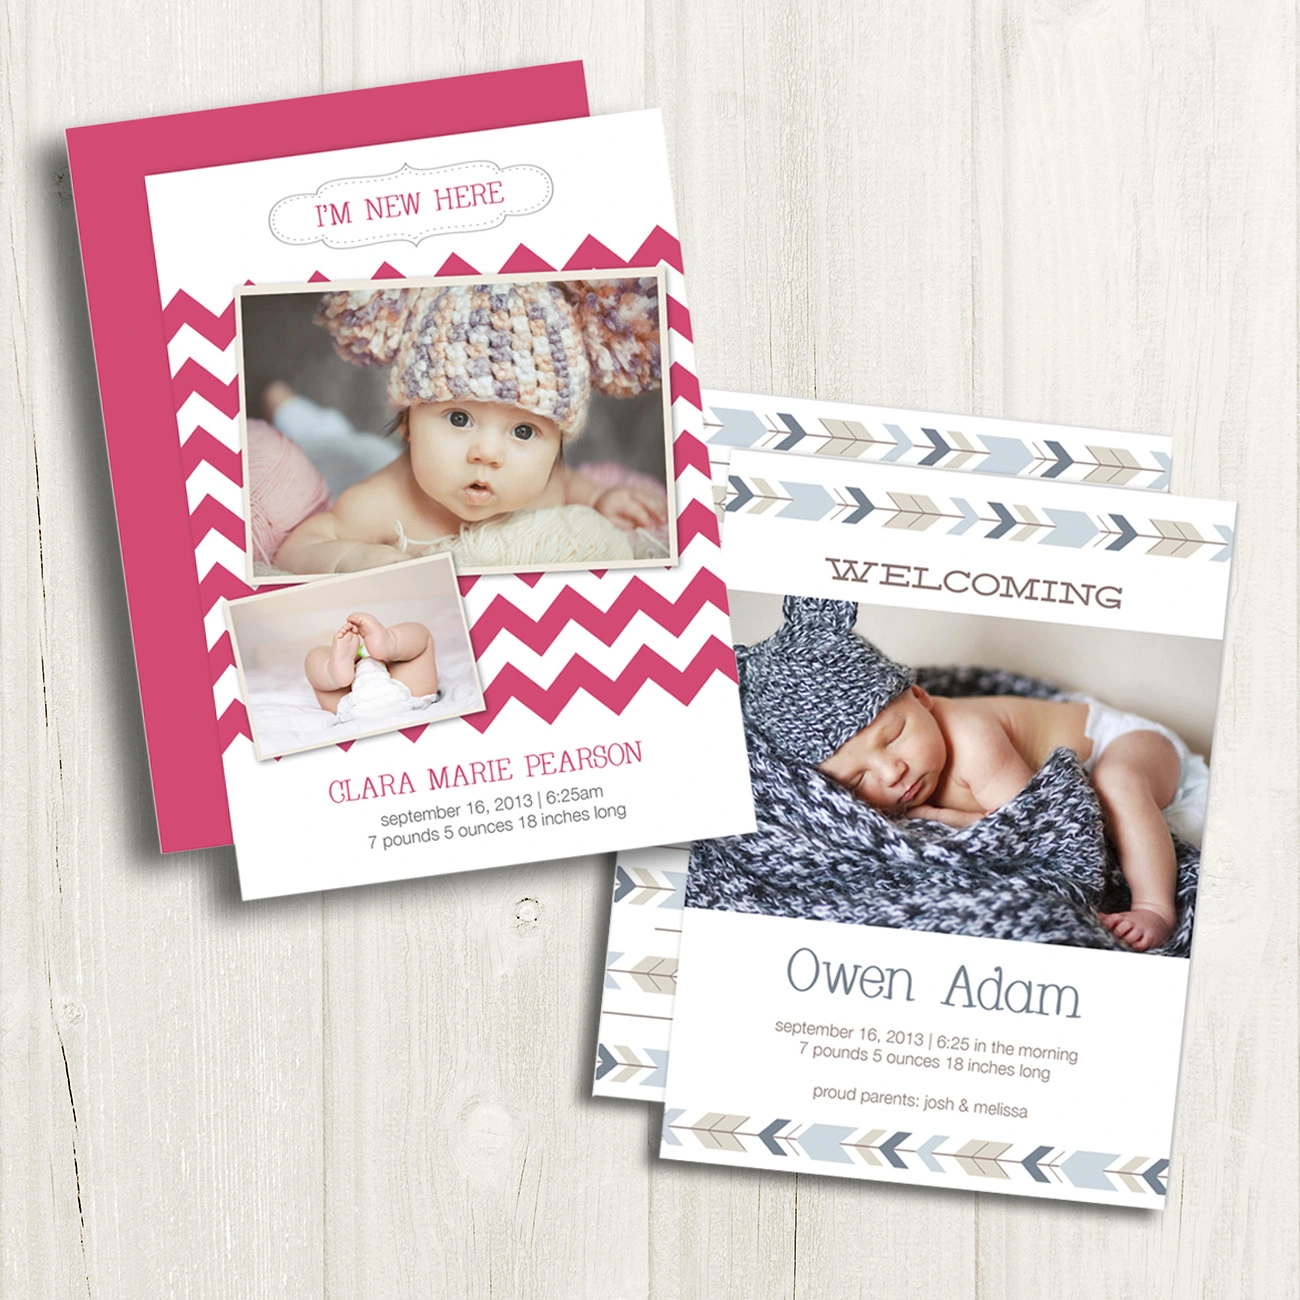 cards-and-stationery/birth-announcements